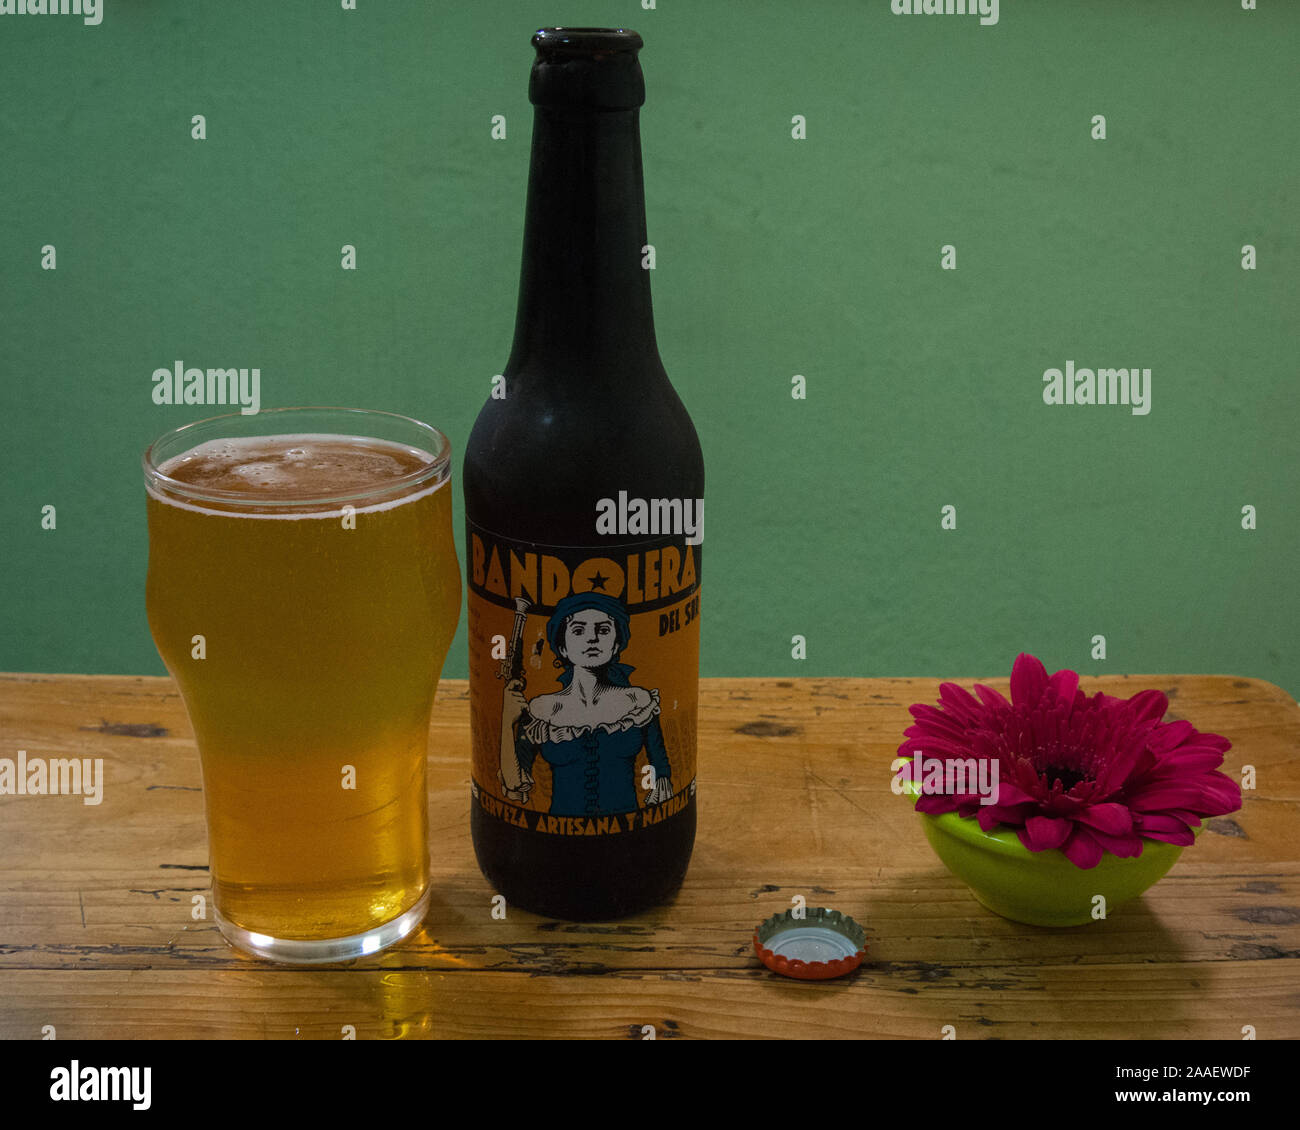 A wooden table with an opened bottle and full glass of Spanish artisanal pale ale called Bandolera, and a small flower vase. Stock Photo